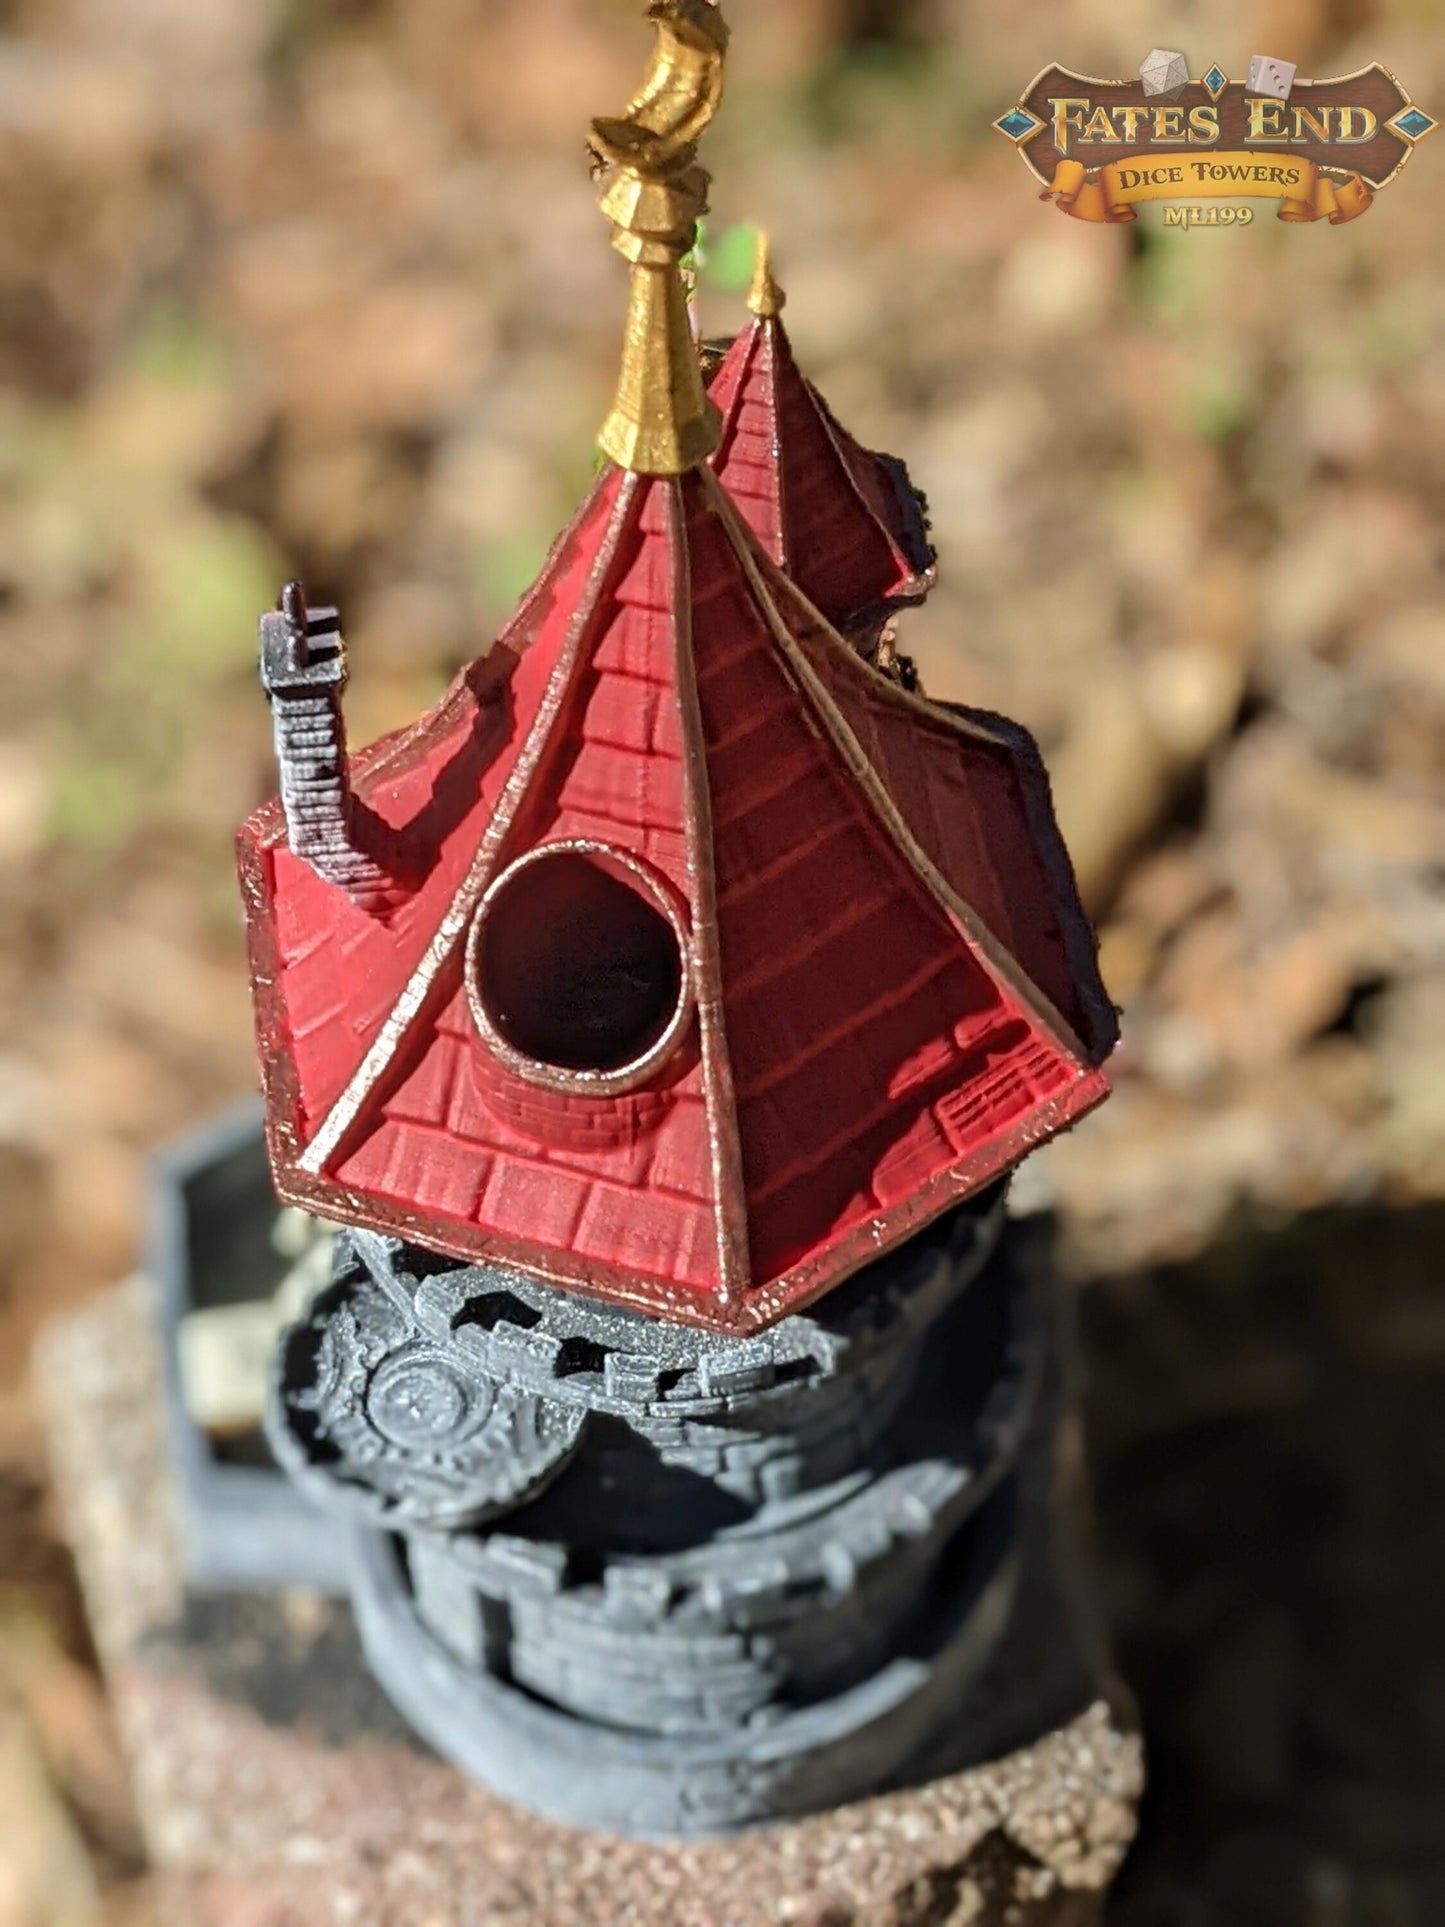 Wizard 3D Printed Dice Tower - Fate's End Collection - Tabletop RPG Gaming Fantasy Cosplay - Channel Arcane Might and Mystical Lore.